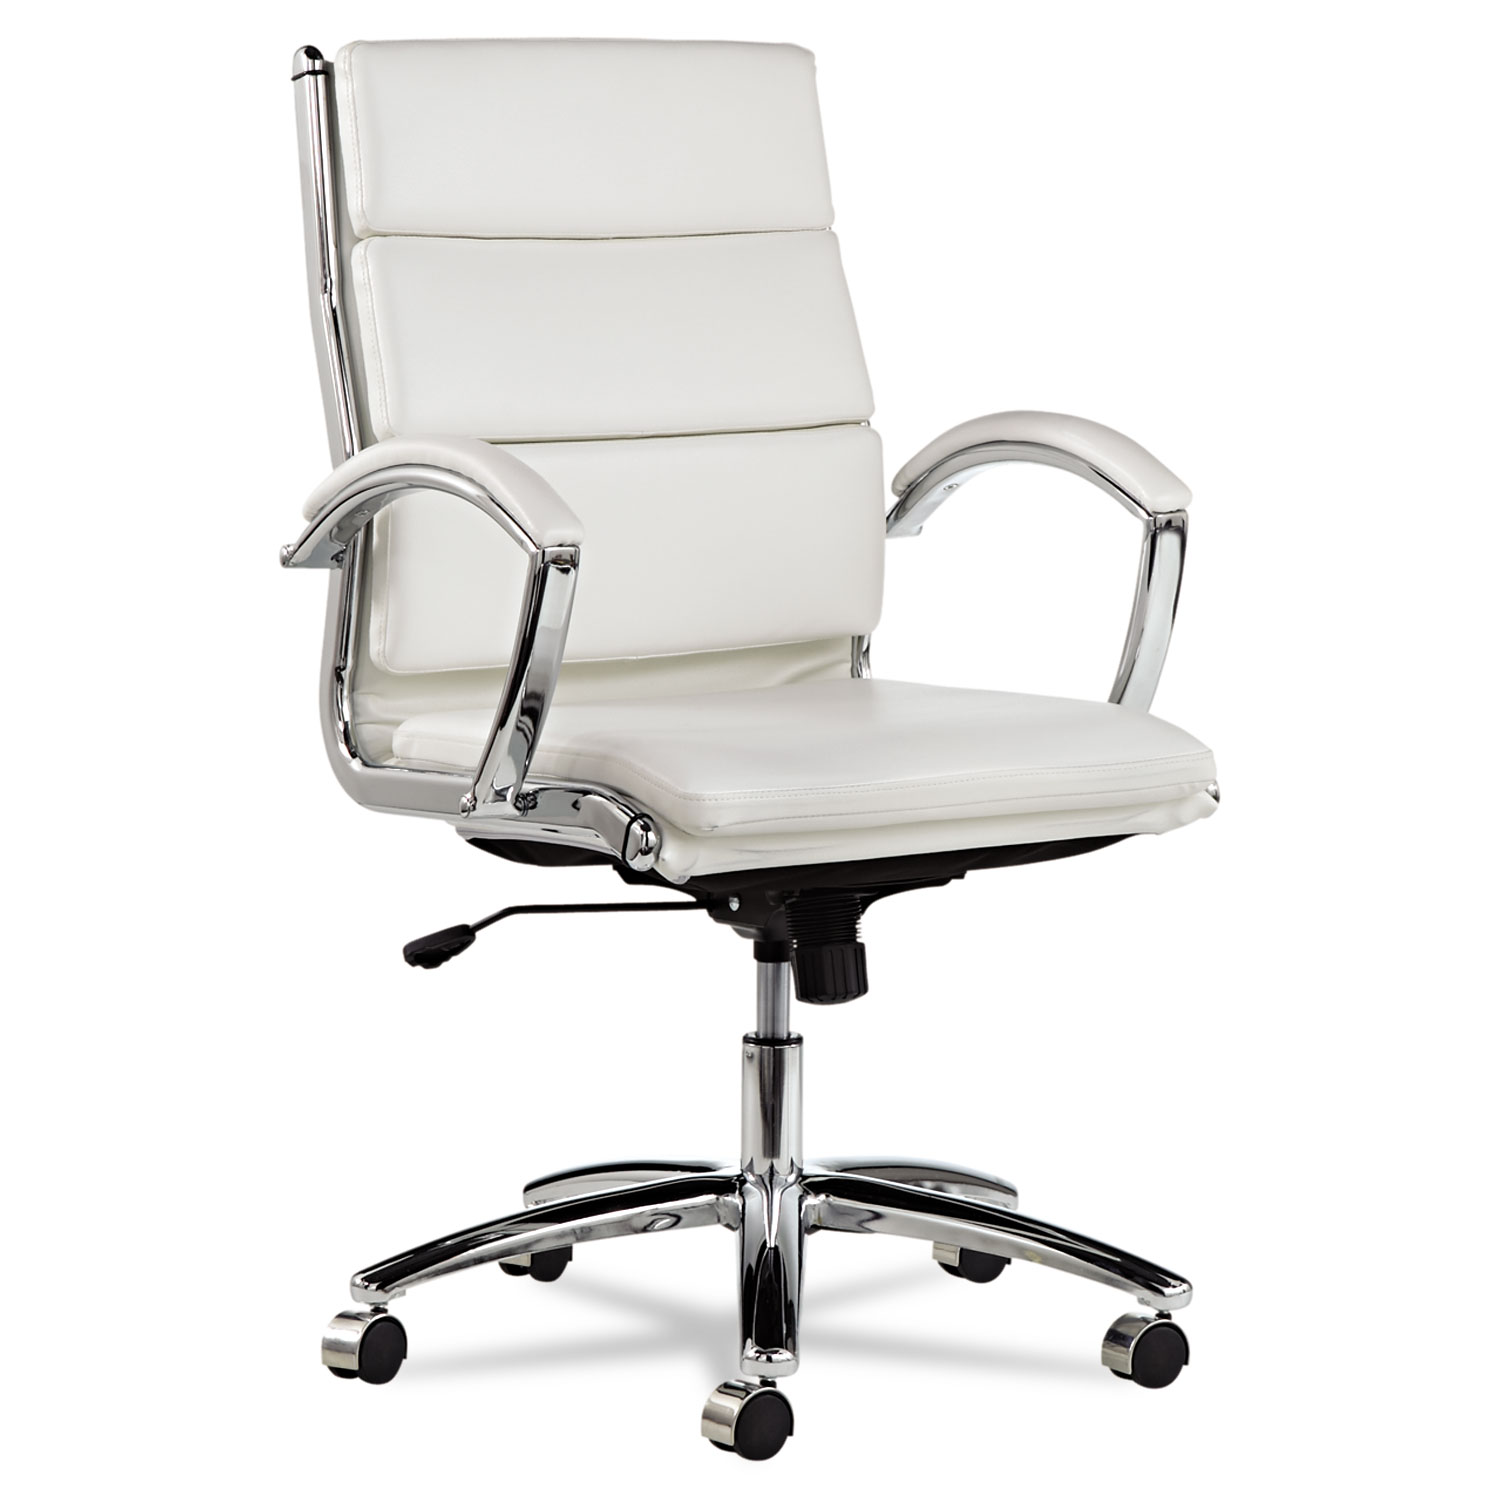 Black Leather Mid Back Computer Office Desk Chair with Waterfall Seat 